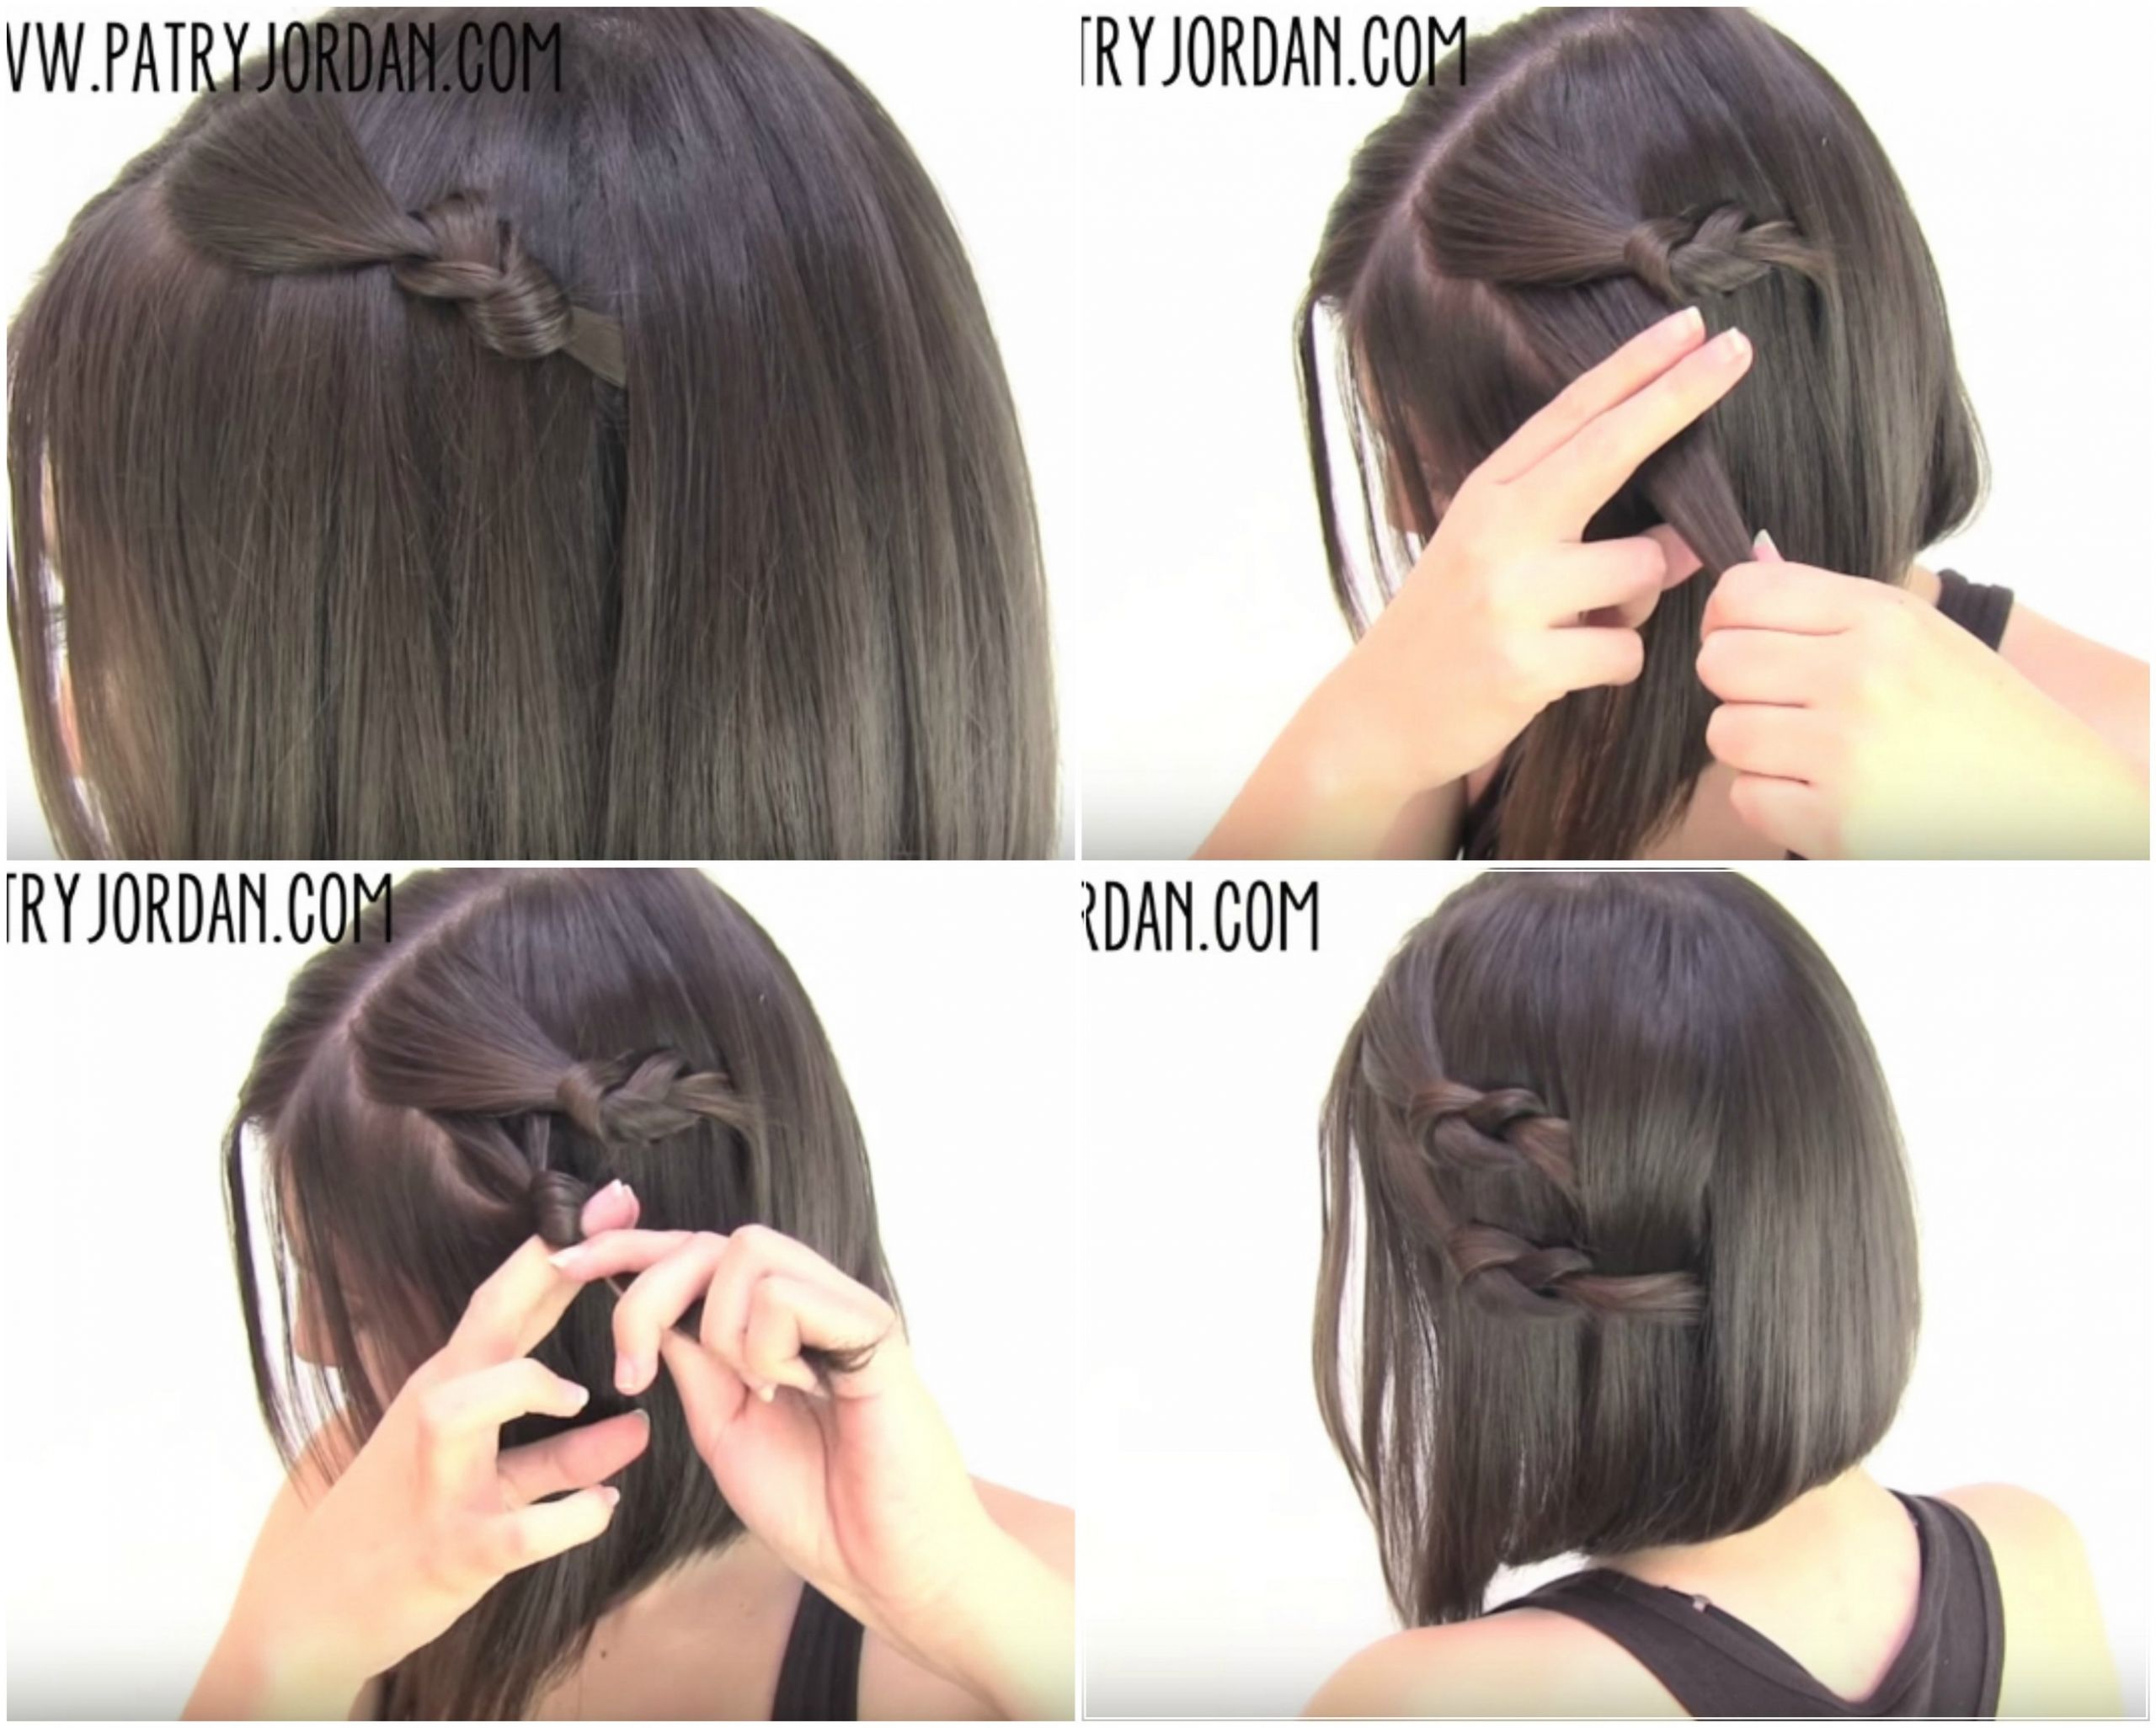 Easy Hairstyles For Short Hair Step By Step
 Video Hair Tutorial 4 Chic & Sassy Easy Hairstyles For